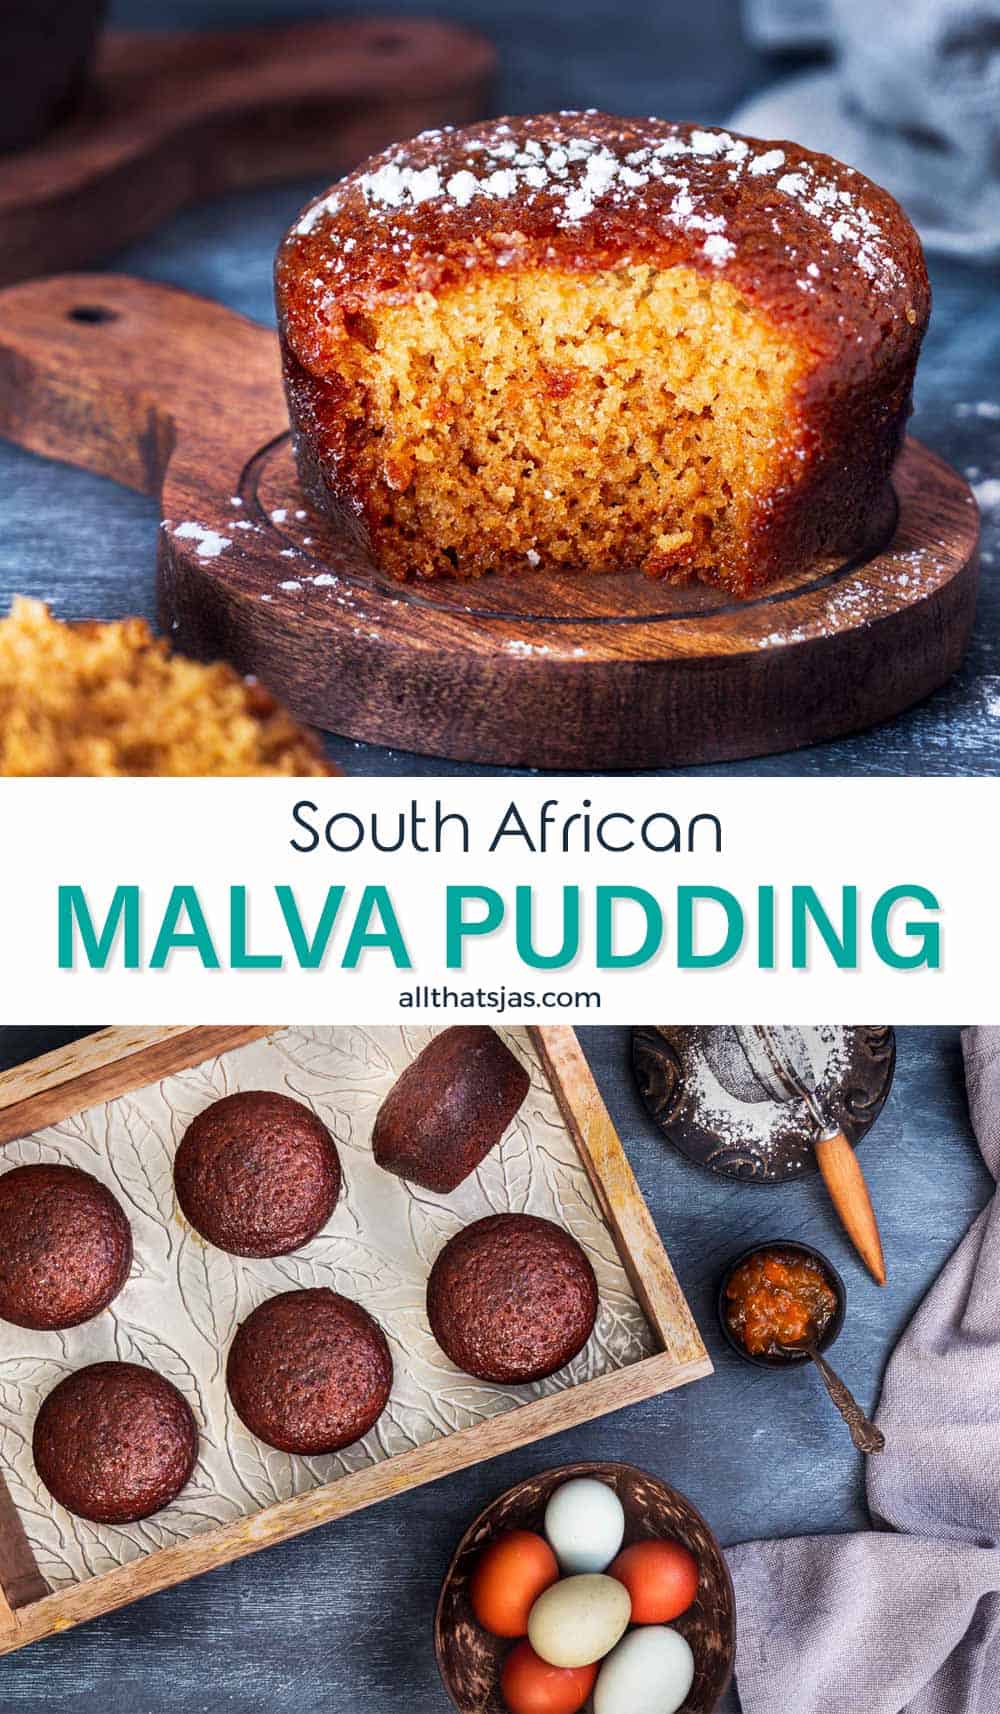 Two-image photo of malva pudding cakes with text overlay in the middle.